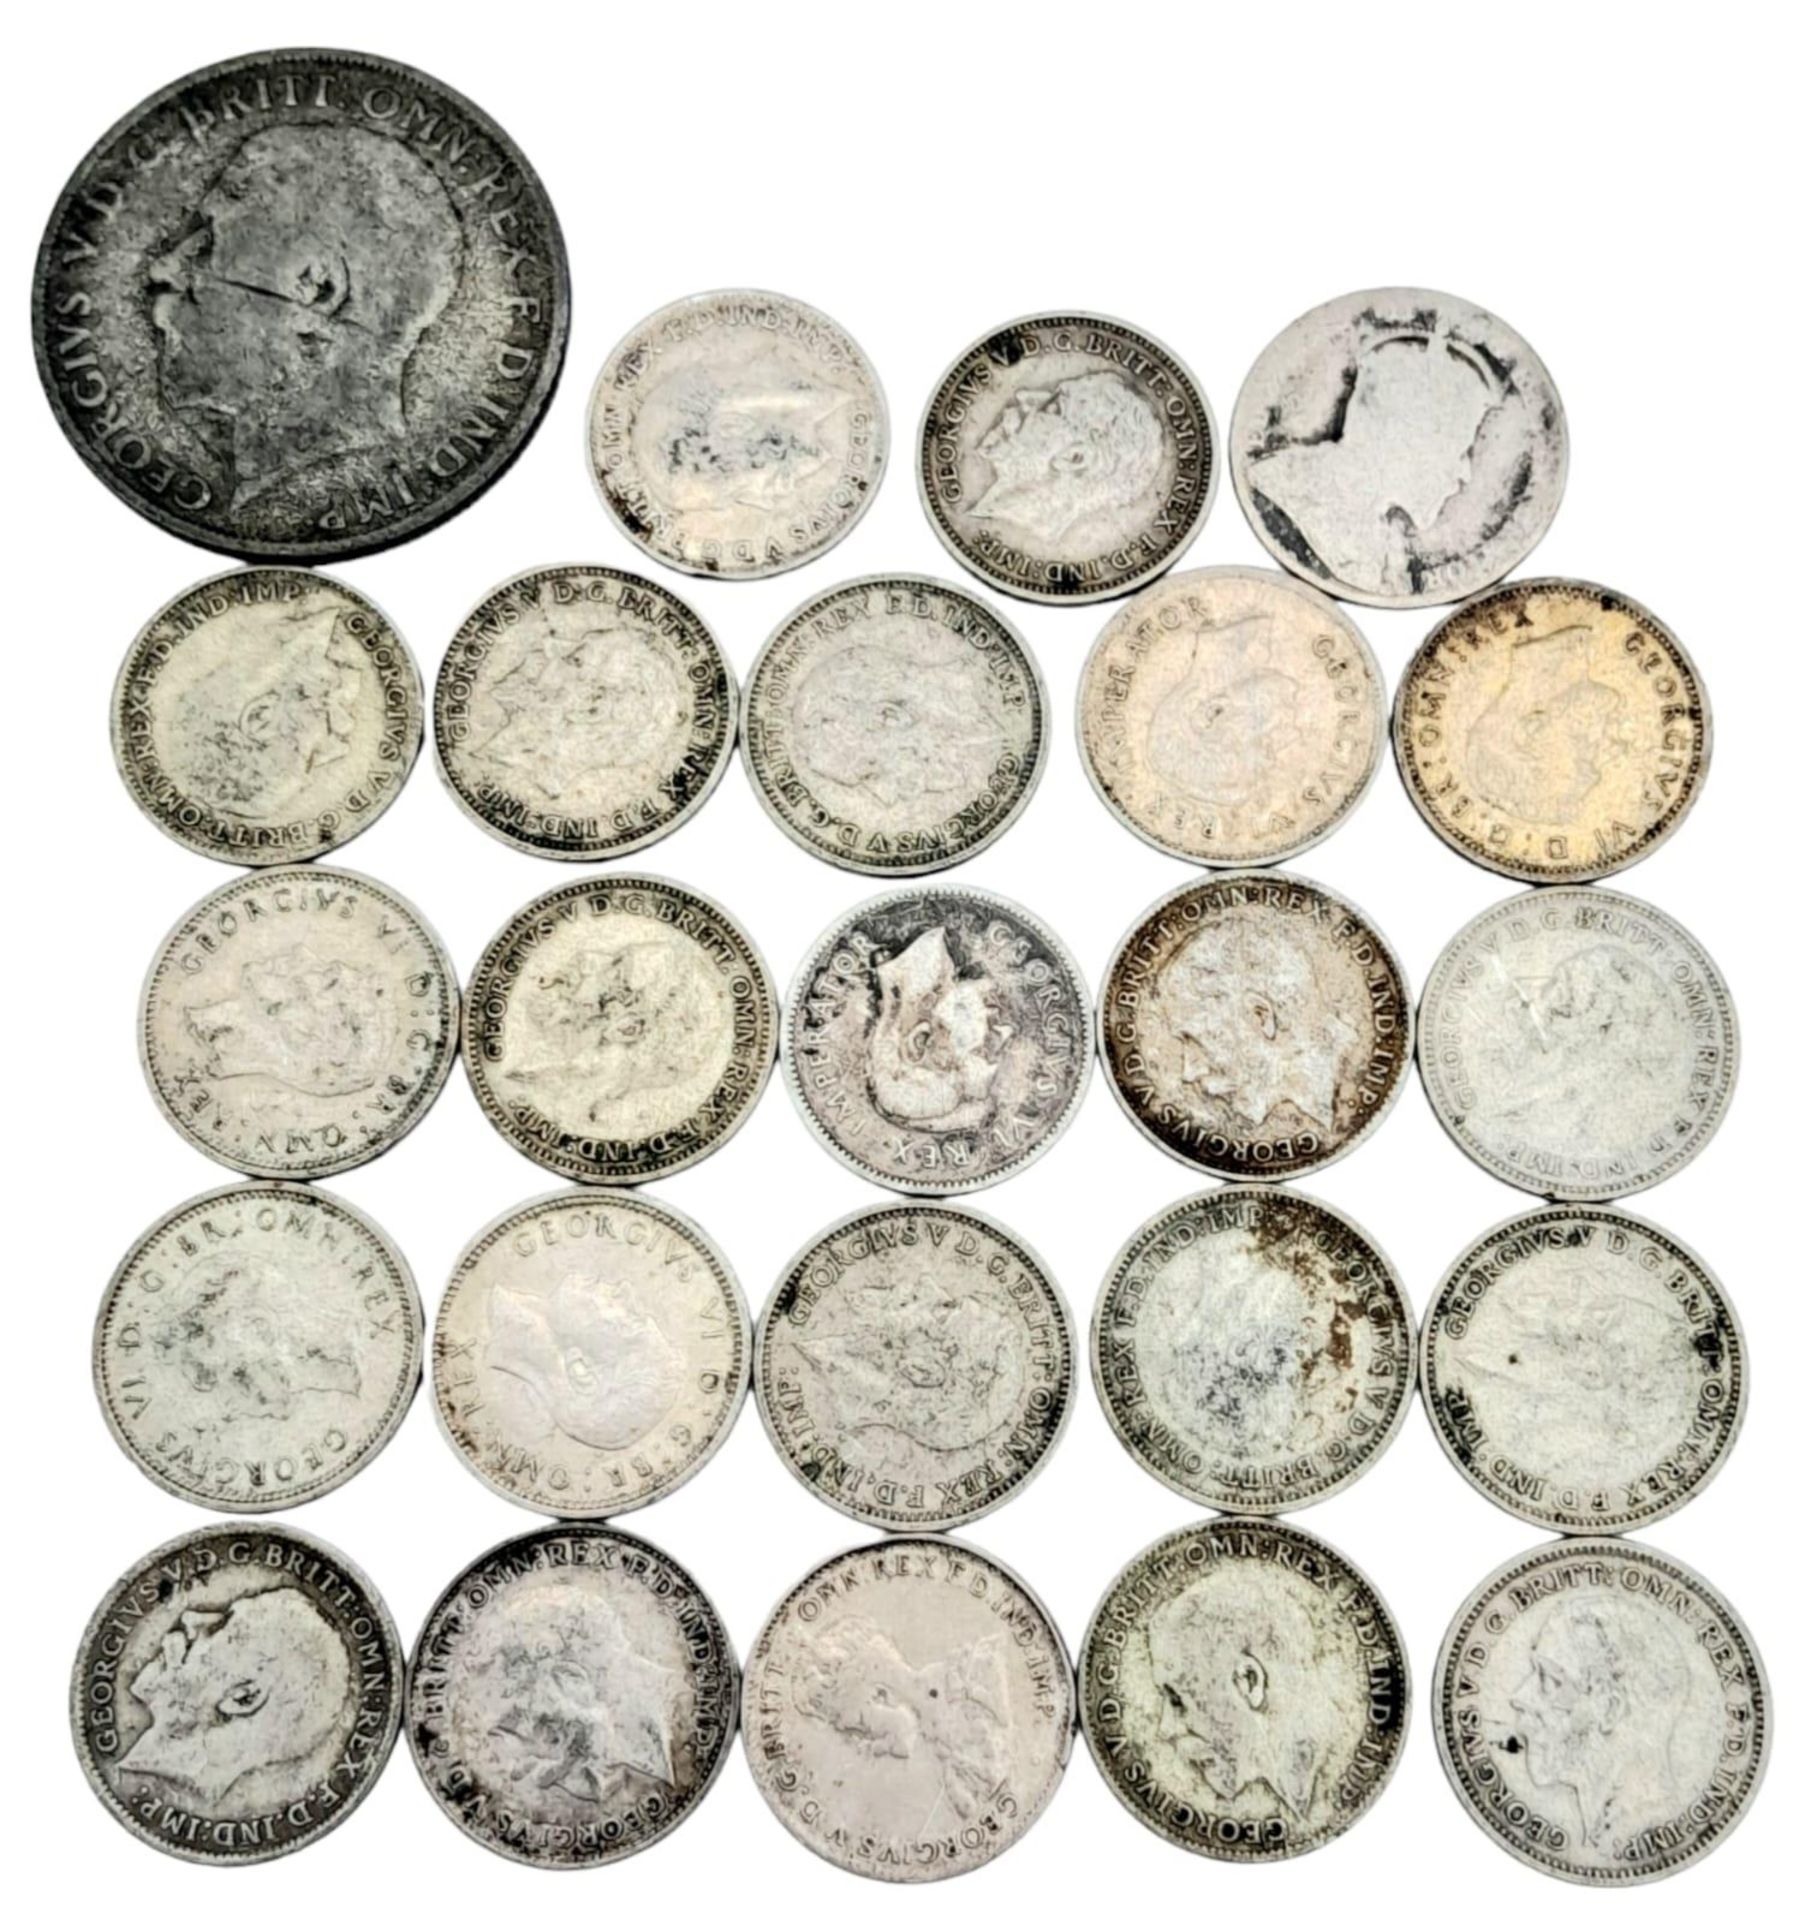 A Parcel of Pre-1947 Silver Coins Dated 1920-1941. Comprising 23x Silver 3 Pence Coins and 1 x 2